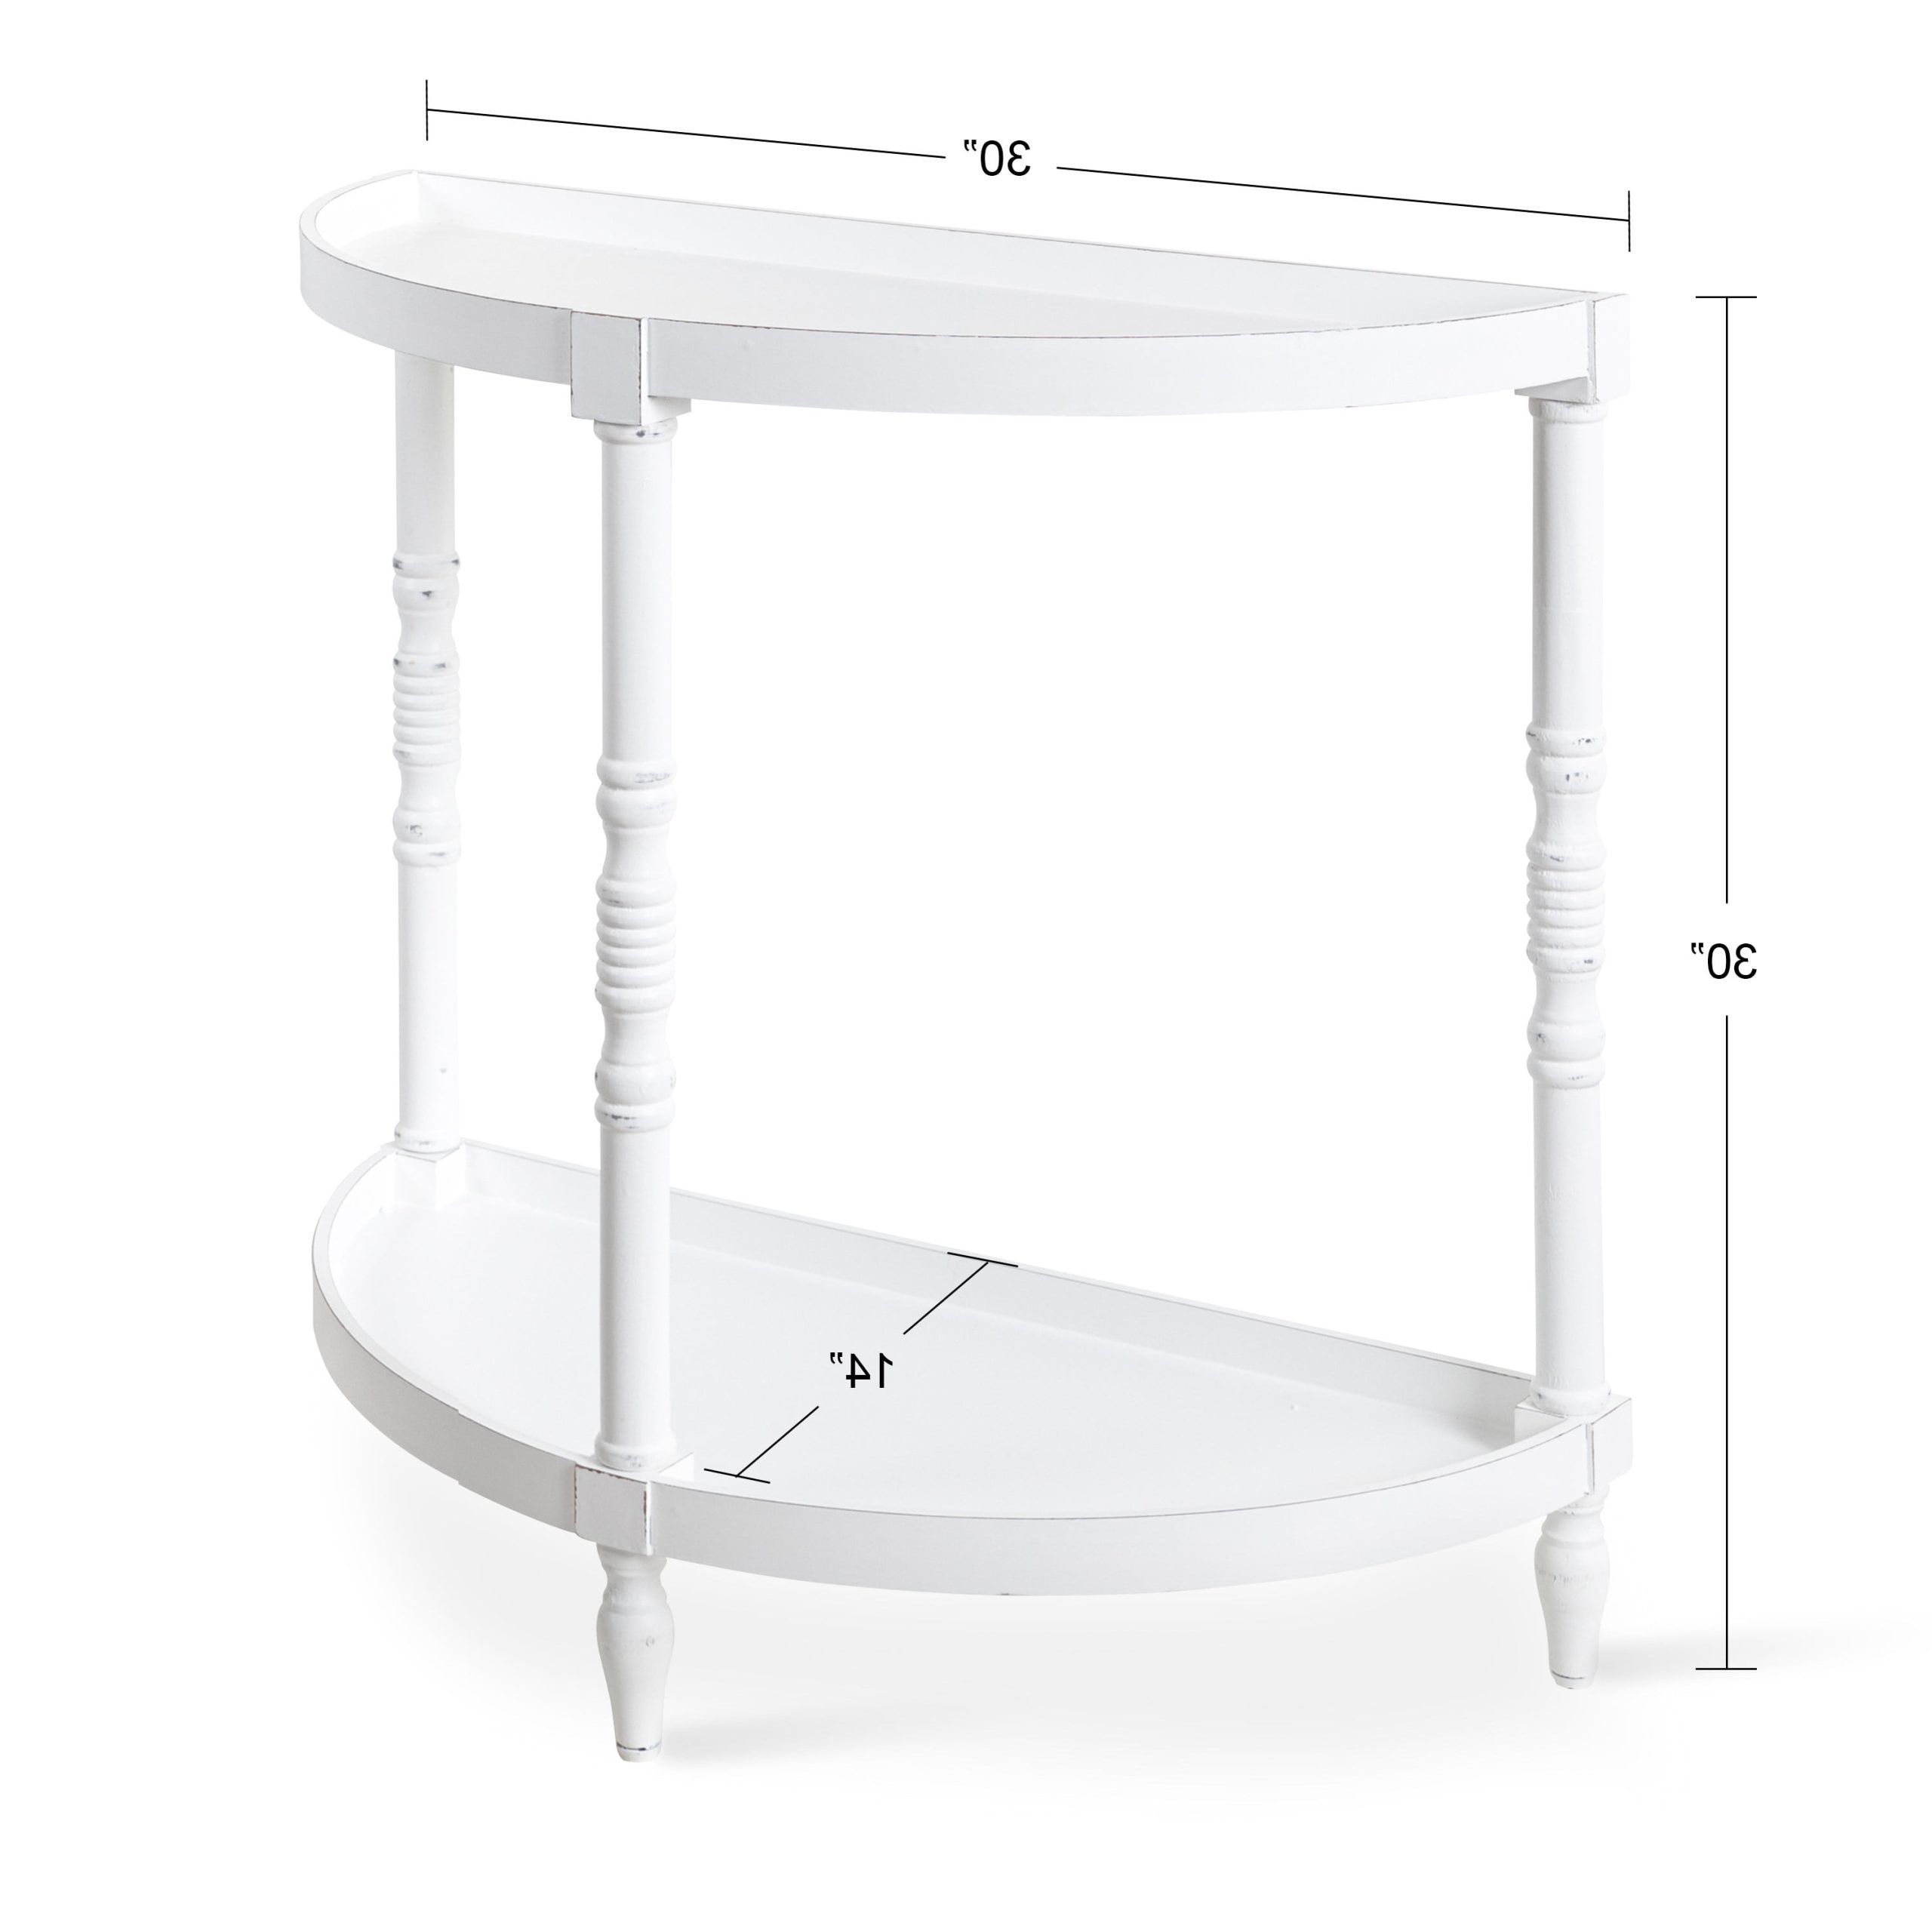 Kate And Laurel Bellport Farmhouse Drink Tables Within Most Current Kate And Laurel Bellport Farmhouse Demilune Console Table, 30 X 14 X 30,  White, Rustic Accent Table For Storage And Display – Walmart (View 7 of 10)